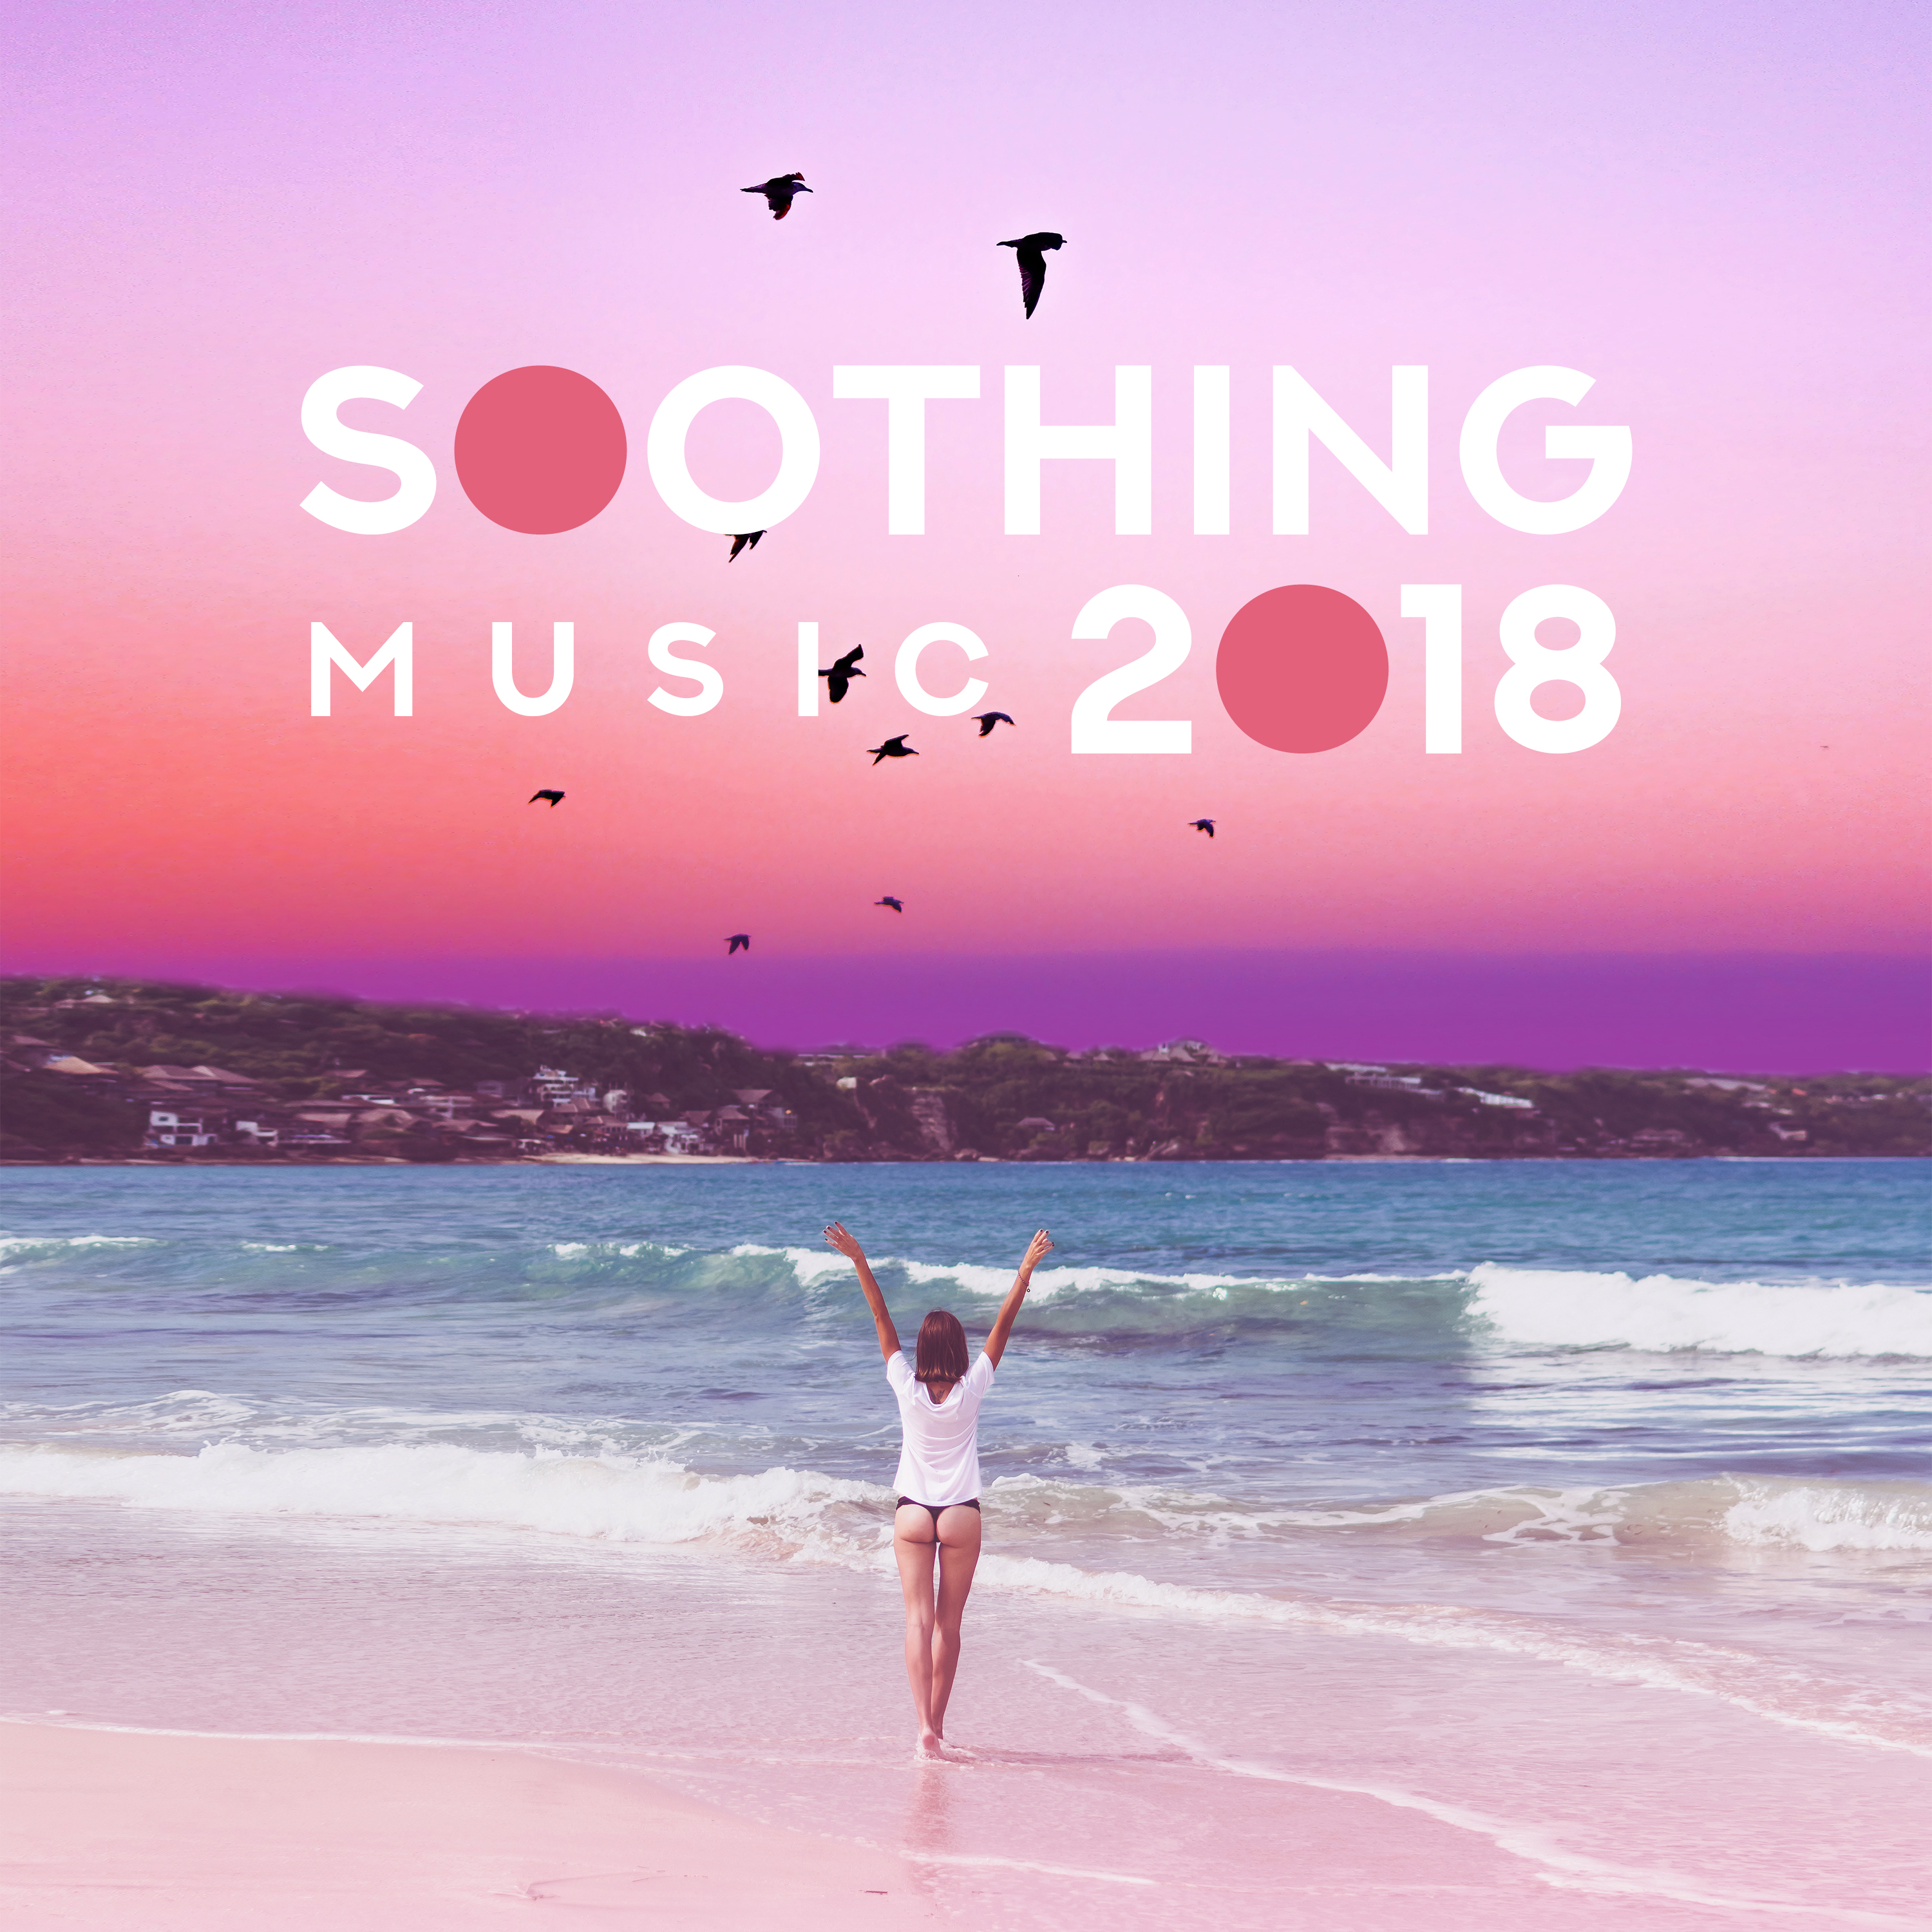 Soothing Music 2018